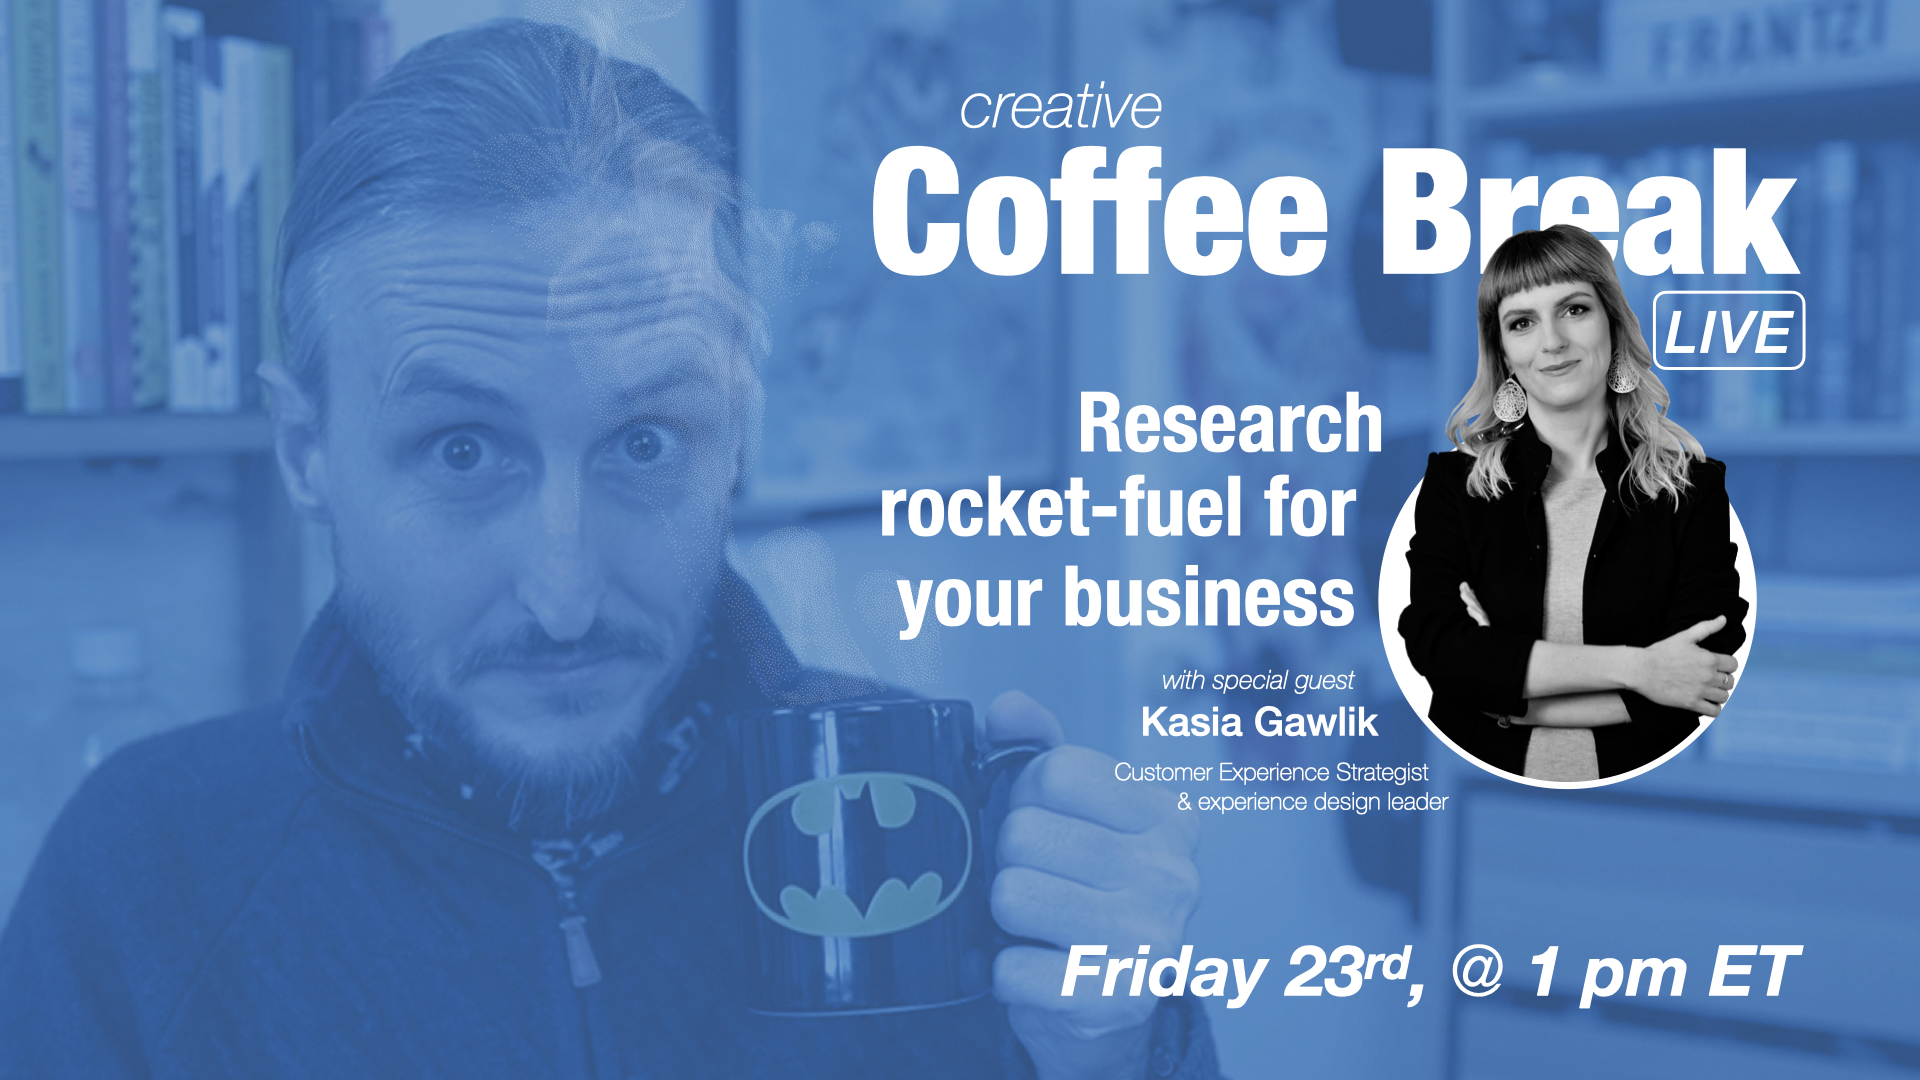 Research Rocket-fuel for Your Business